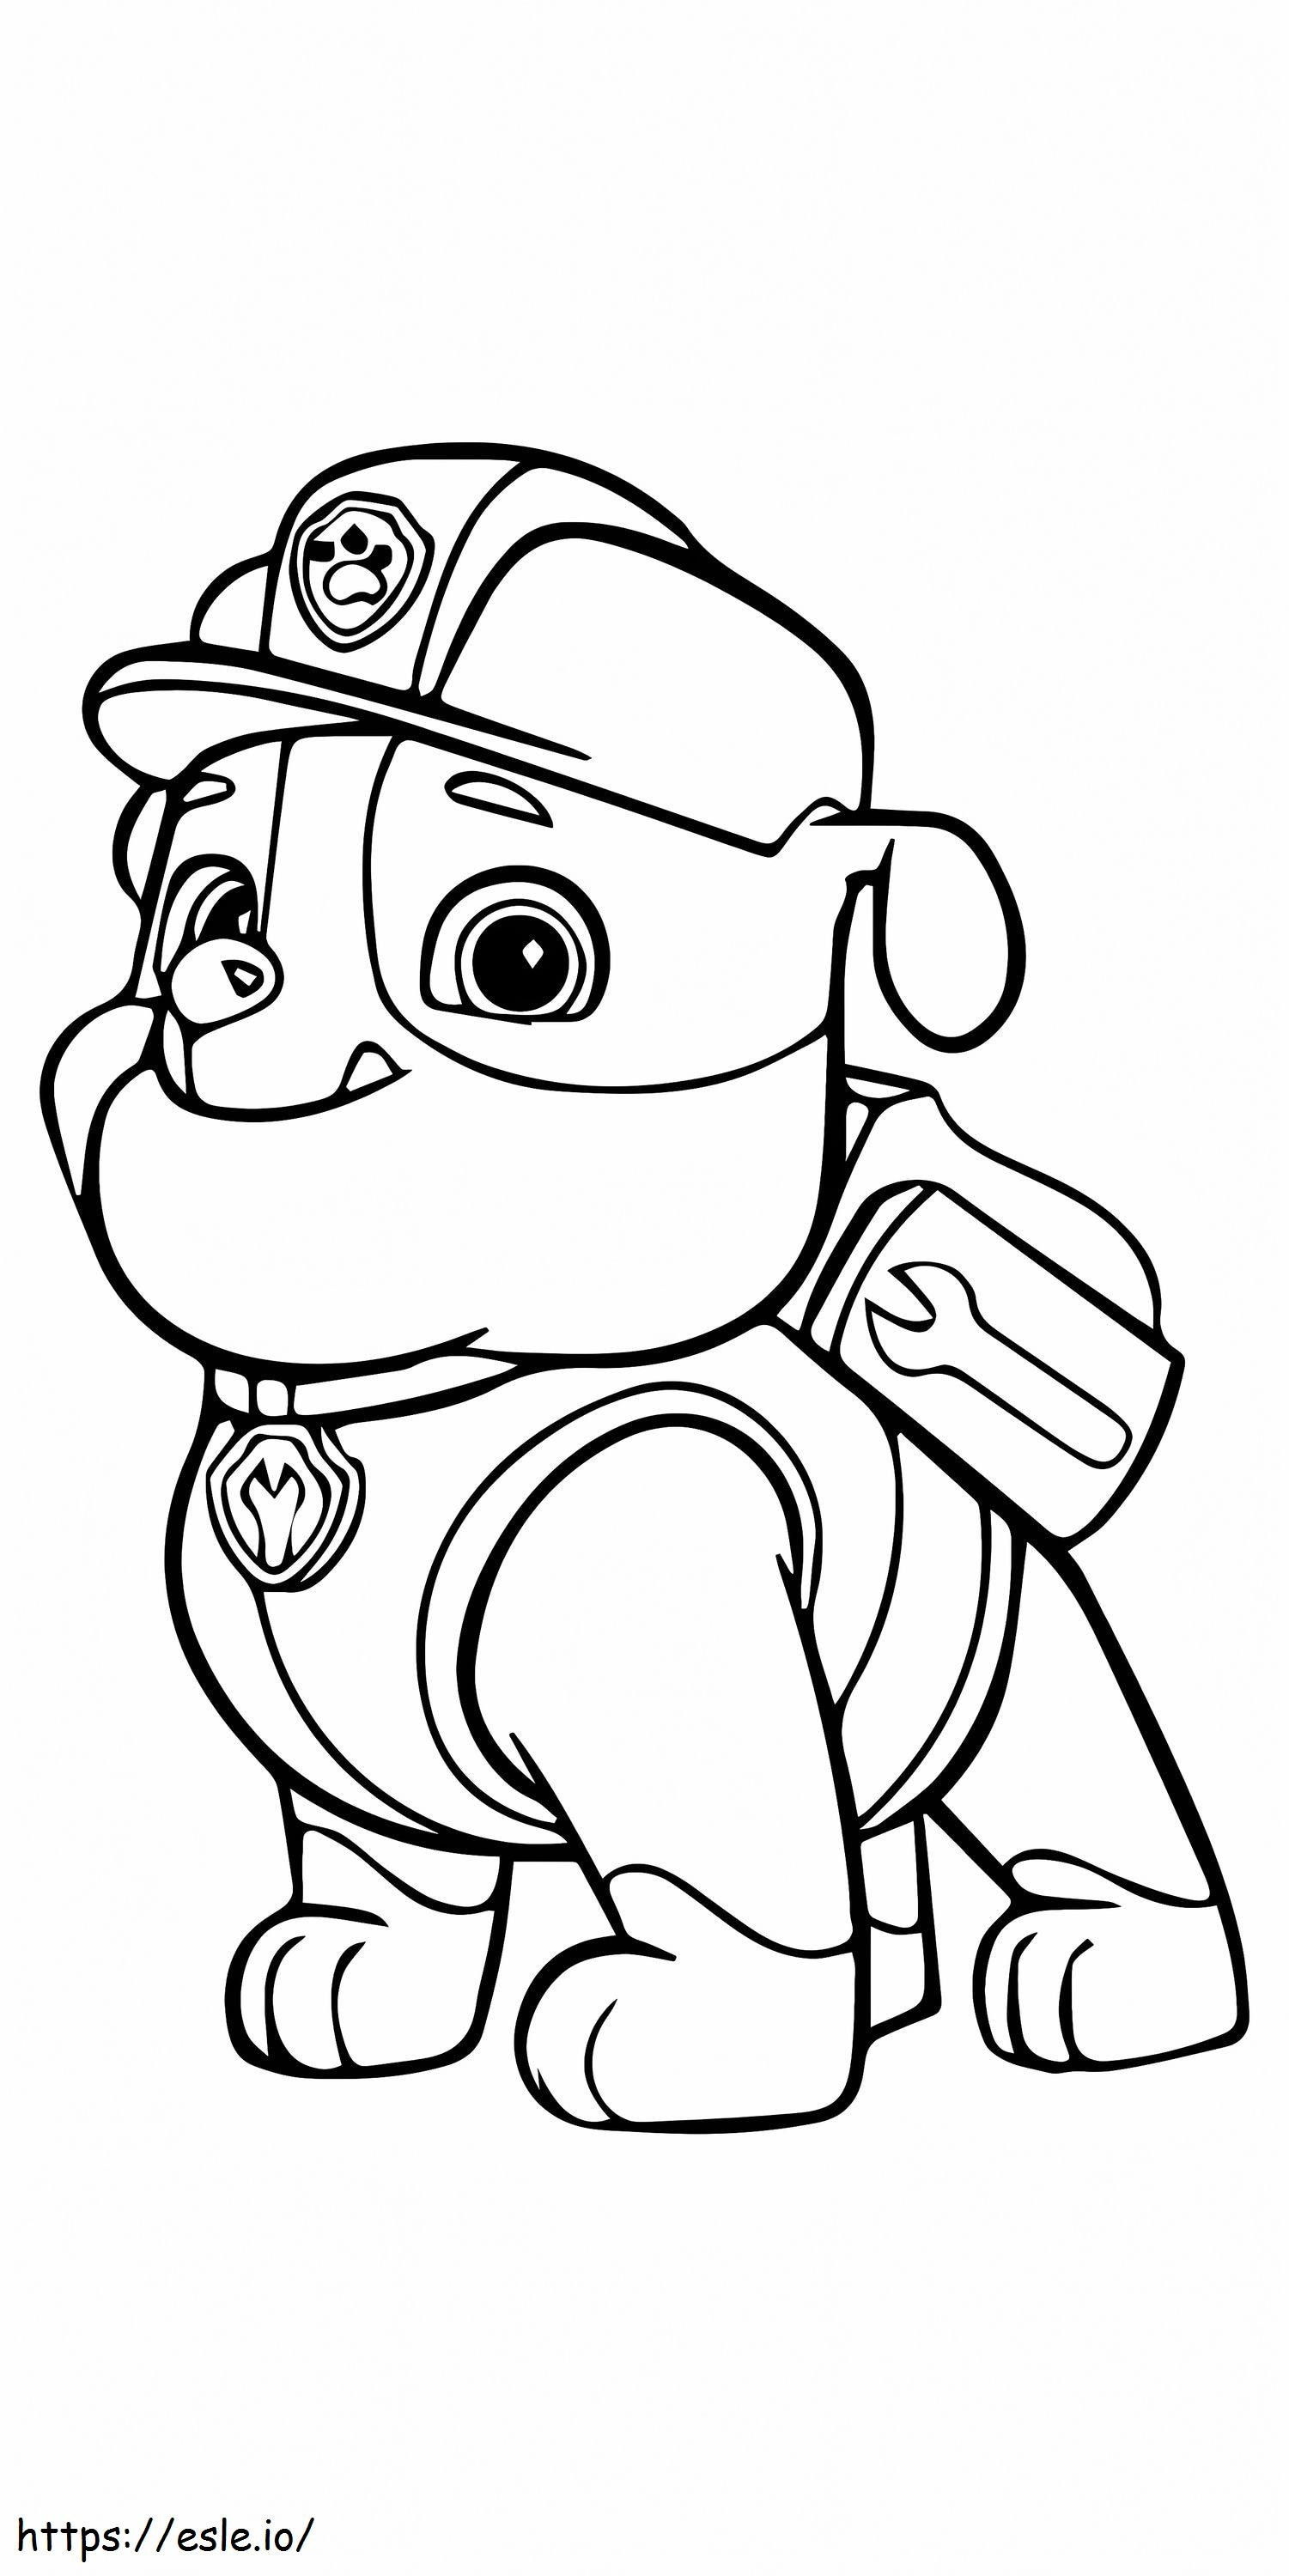 Paw Patrol Everest coloring page